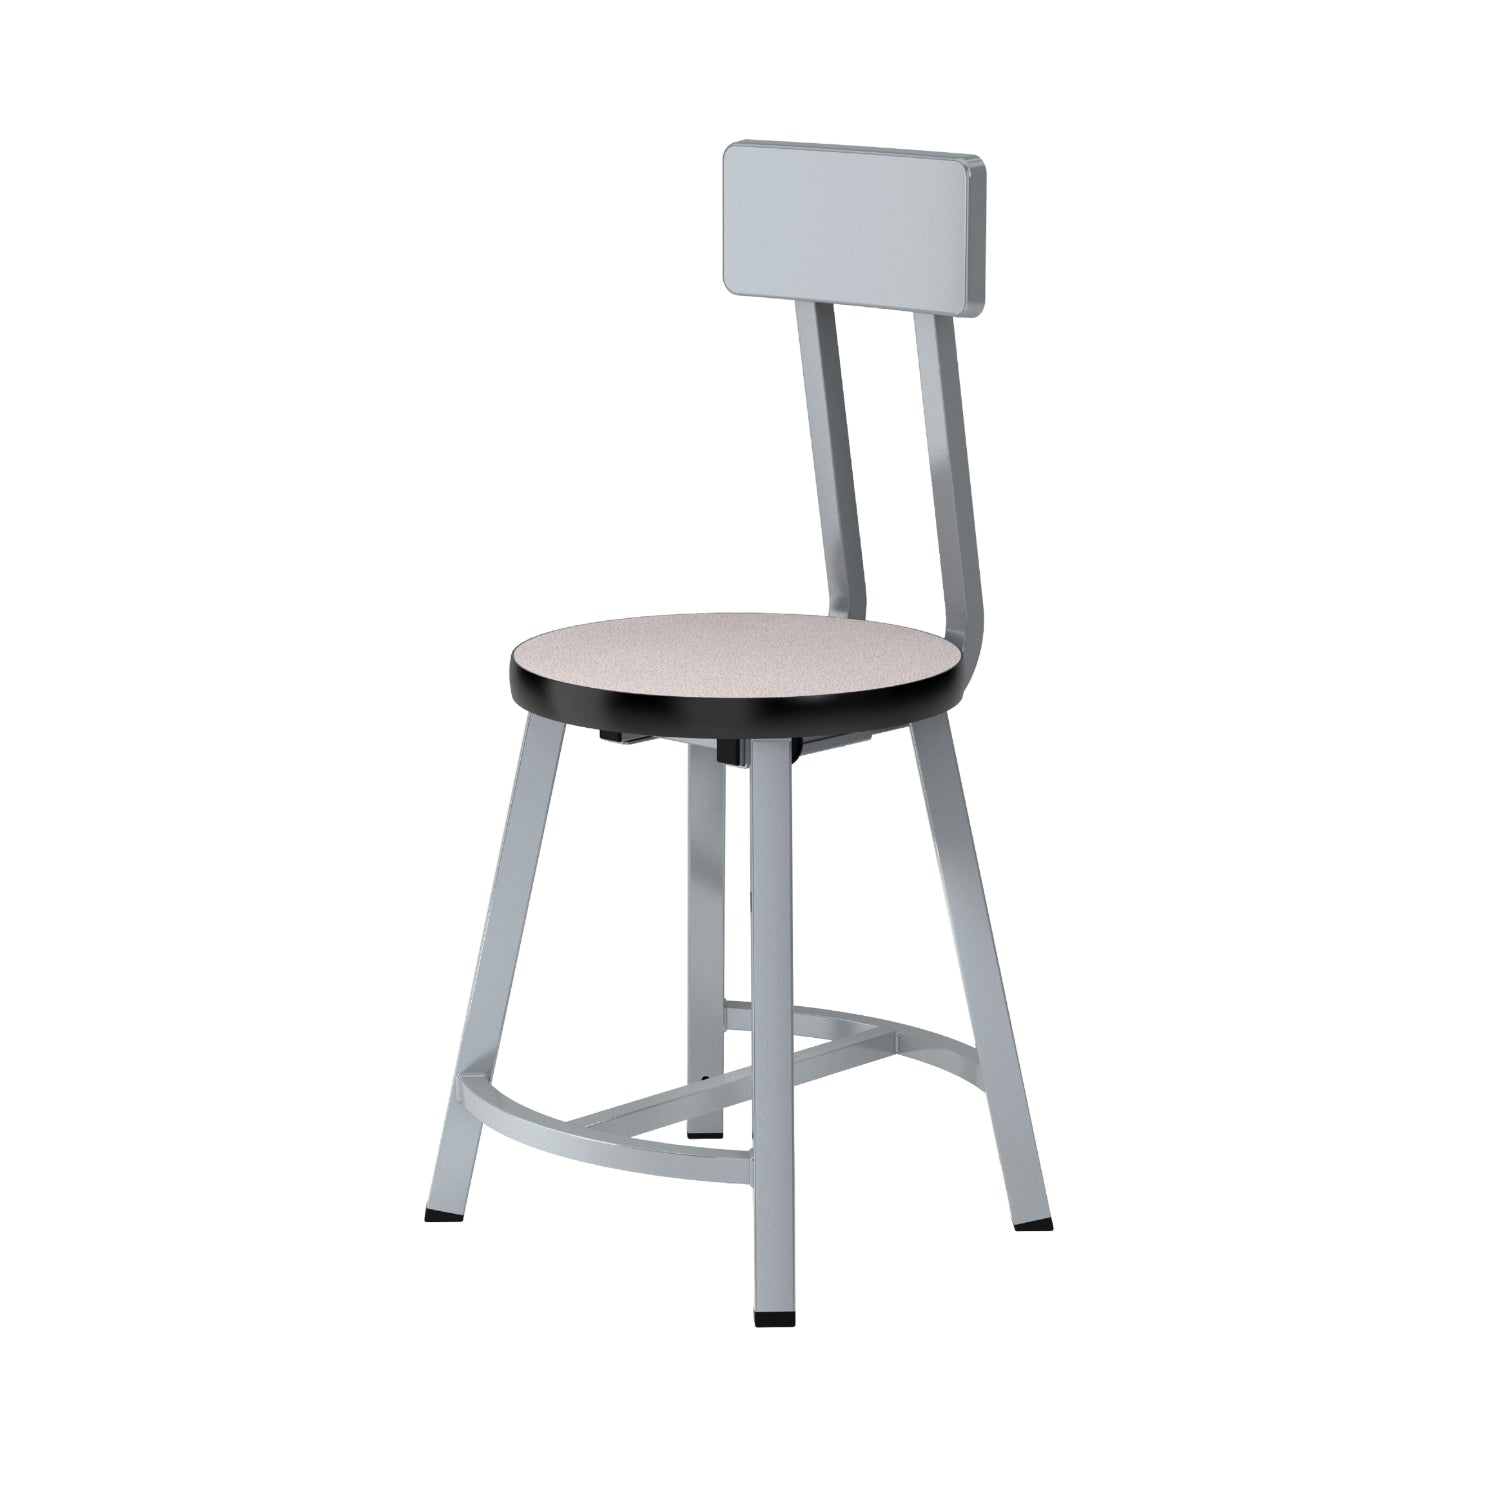 Titan Stool with Backrest, Laminate Seat with Particleboard Core/T-Mold Edge, 18" Seat Height